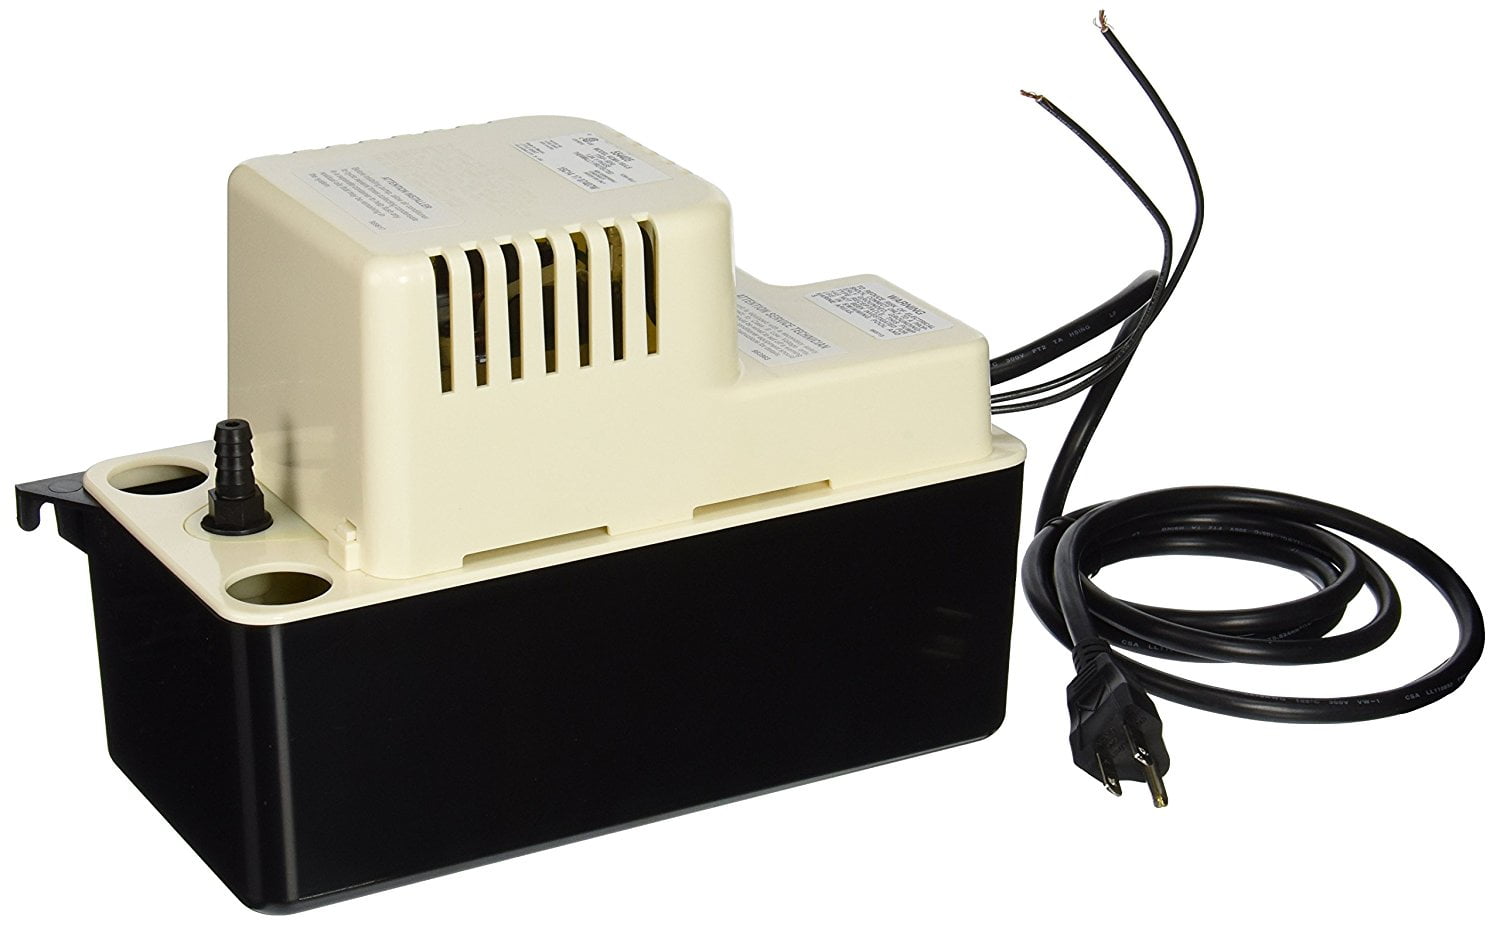 DiversiTech Cp-16 120v Condensate Pump With 16 Foot Lift for sale online 